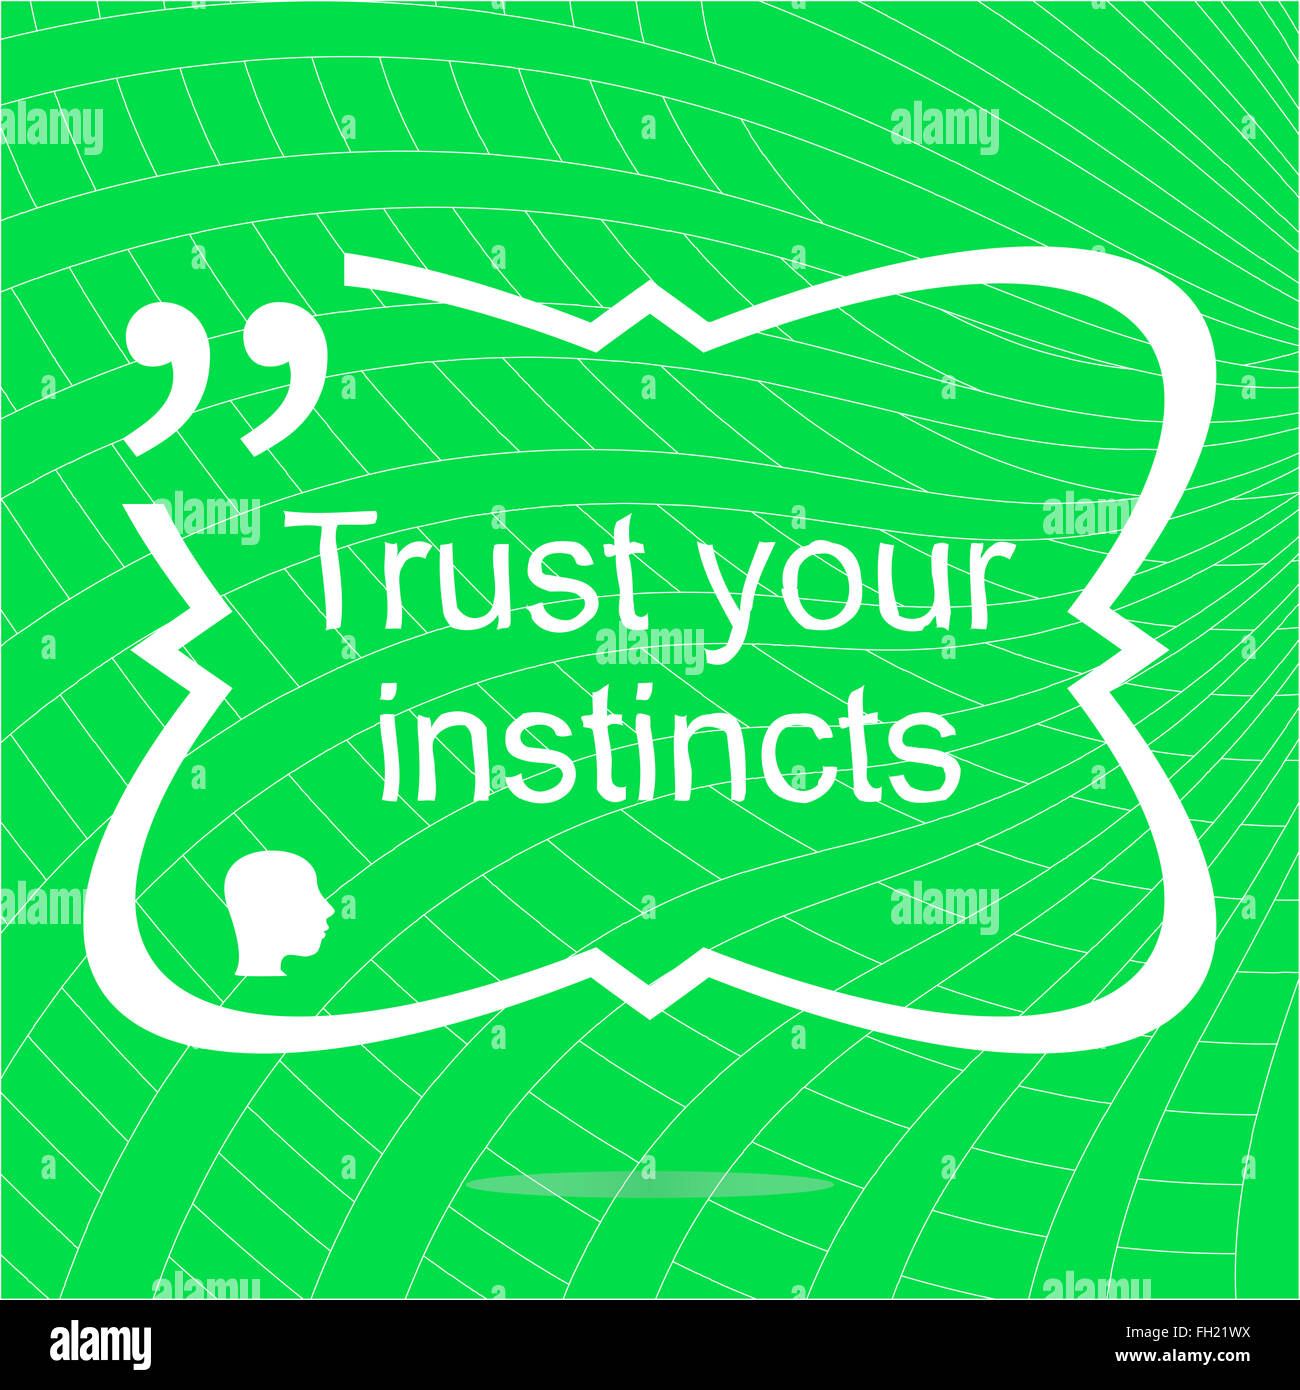 Trust your instincts. Inspirational motivational quote. Simple trendy design. Positive quote Stock Photo